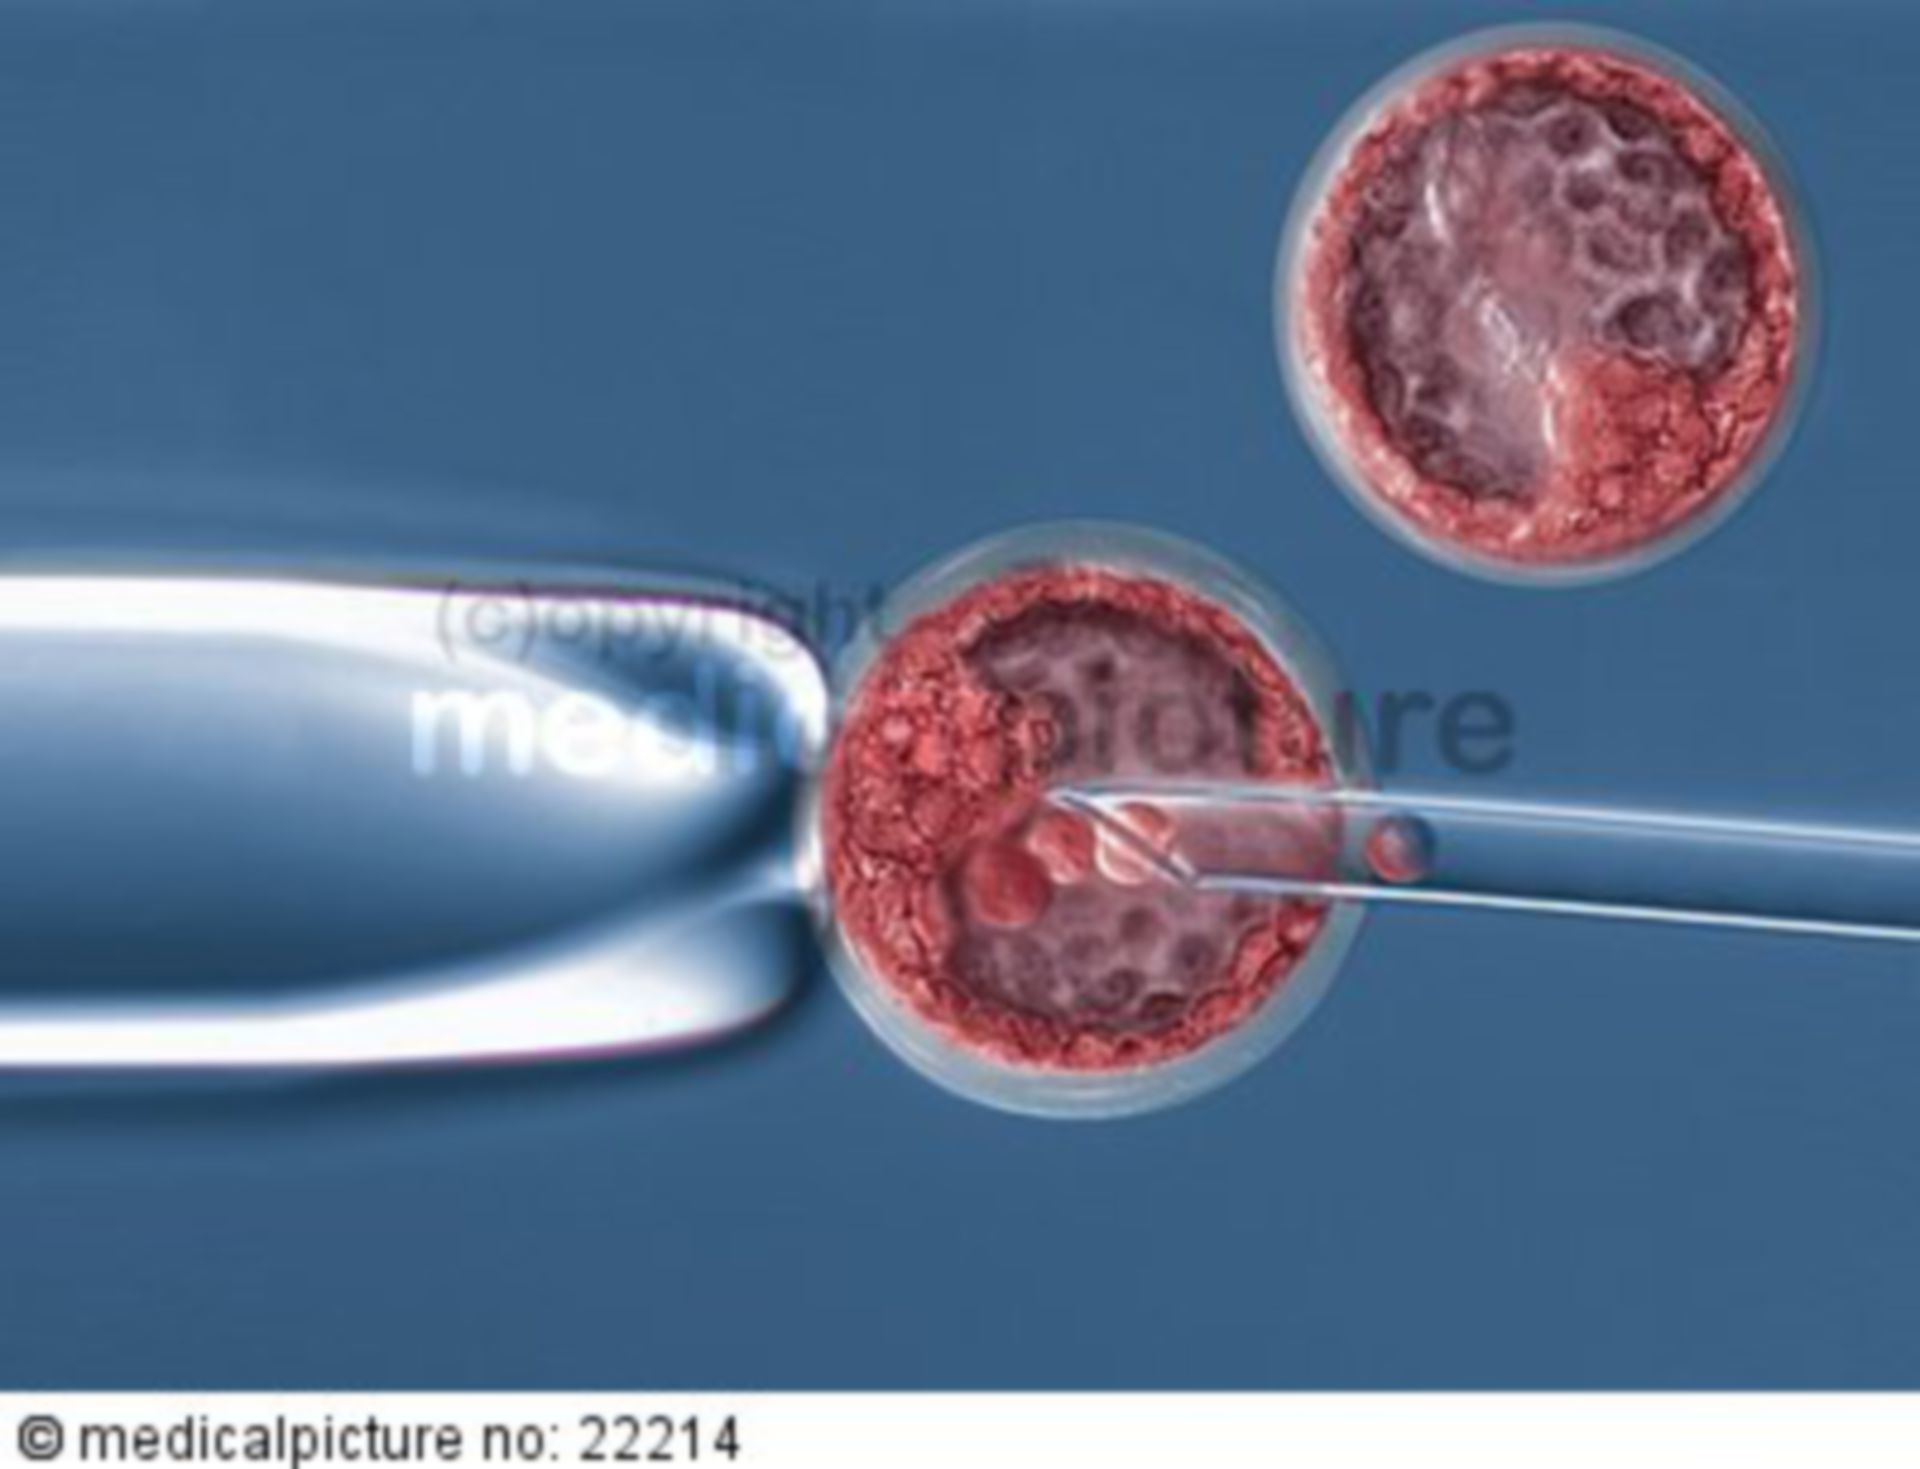 Harvesting of stem cells from a blastocyst